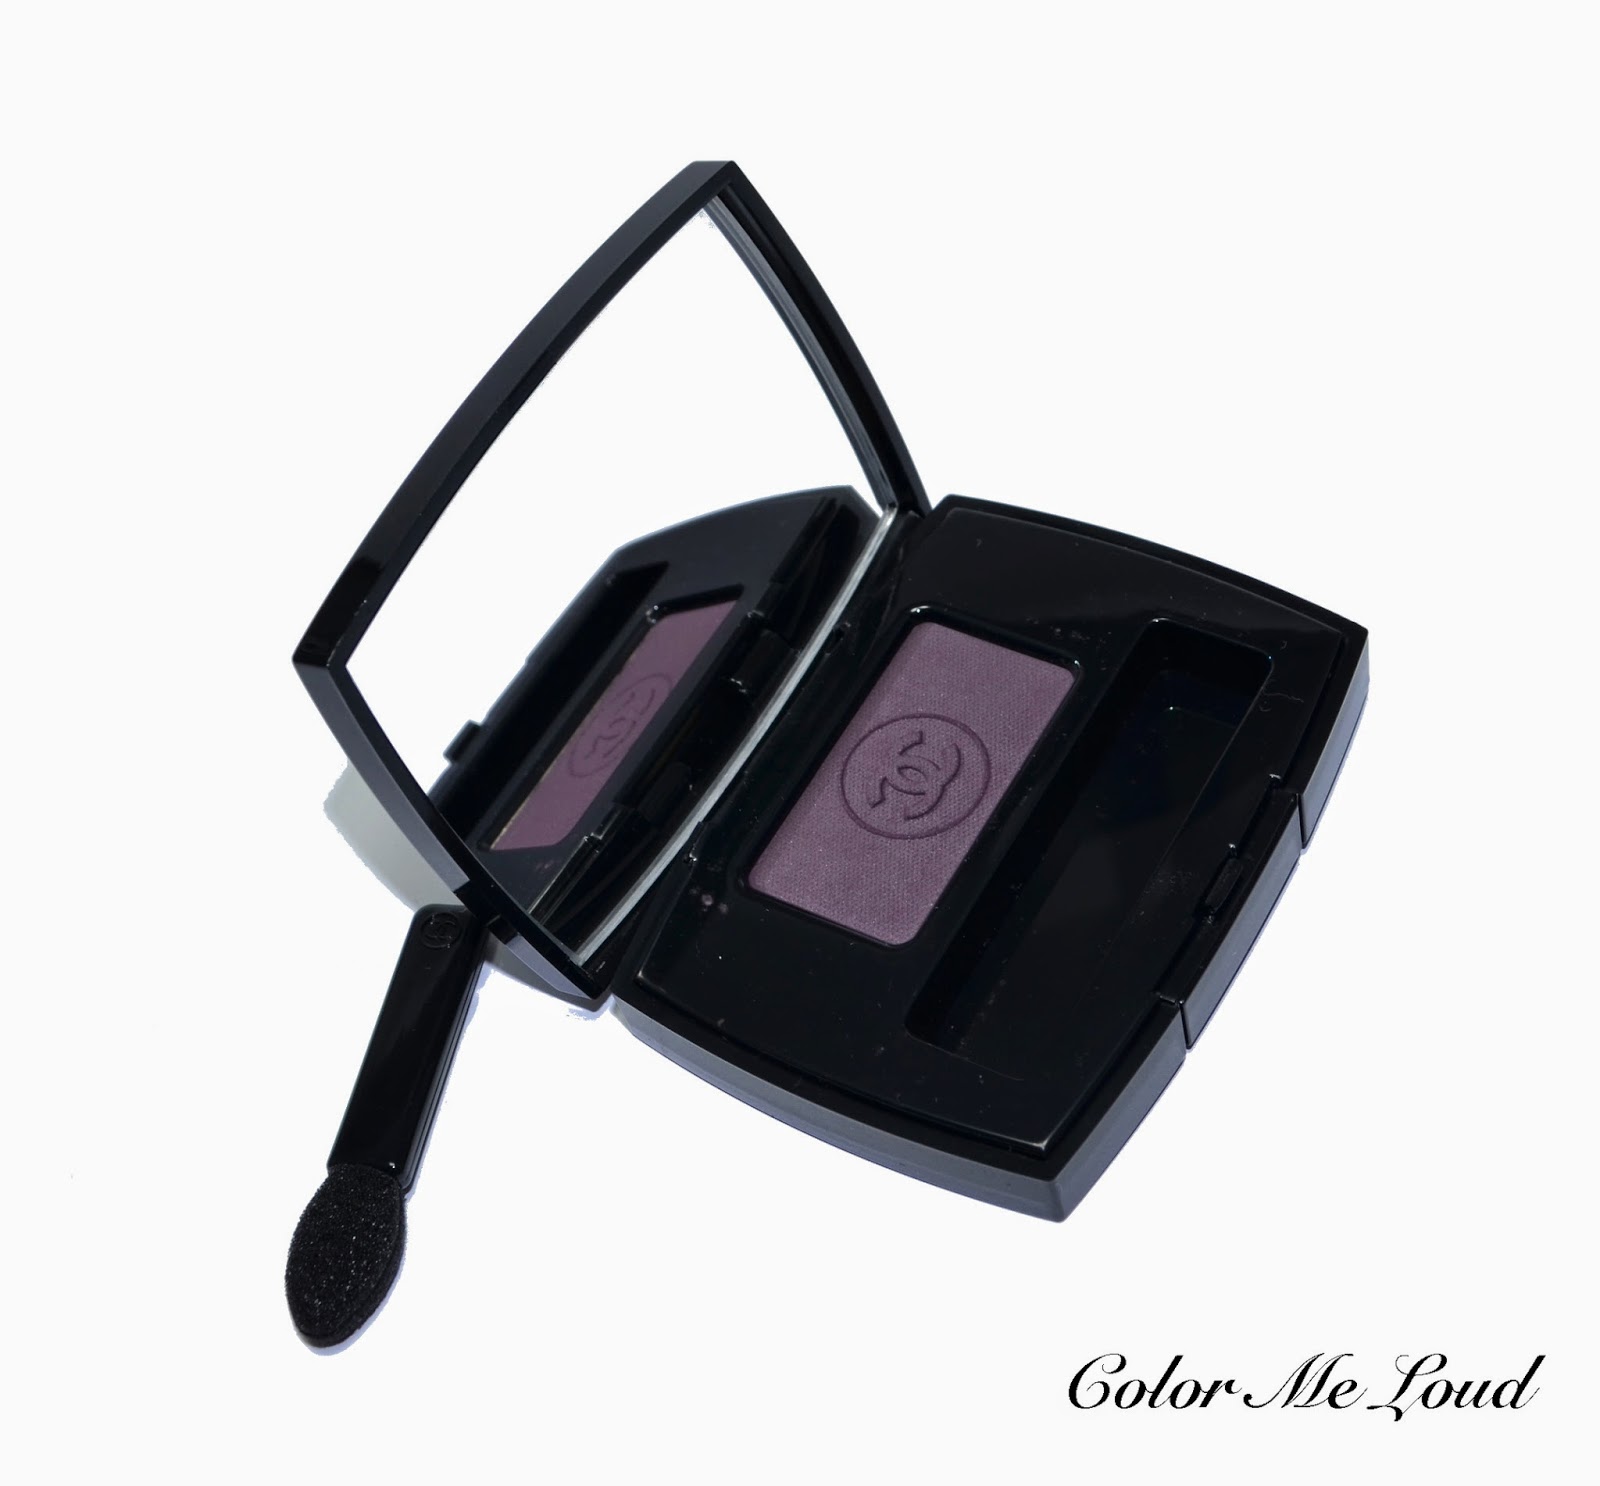 Chanel Ombre Essentielle #112 Pulsion from États Poétiques Collection for Fall 2014, Swatch, Comparison and FOTD